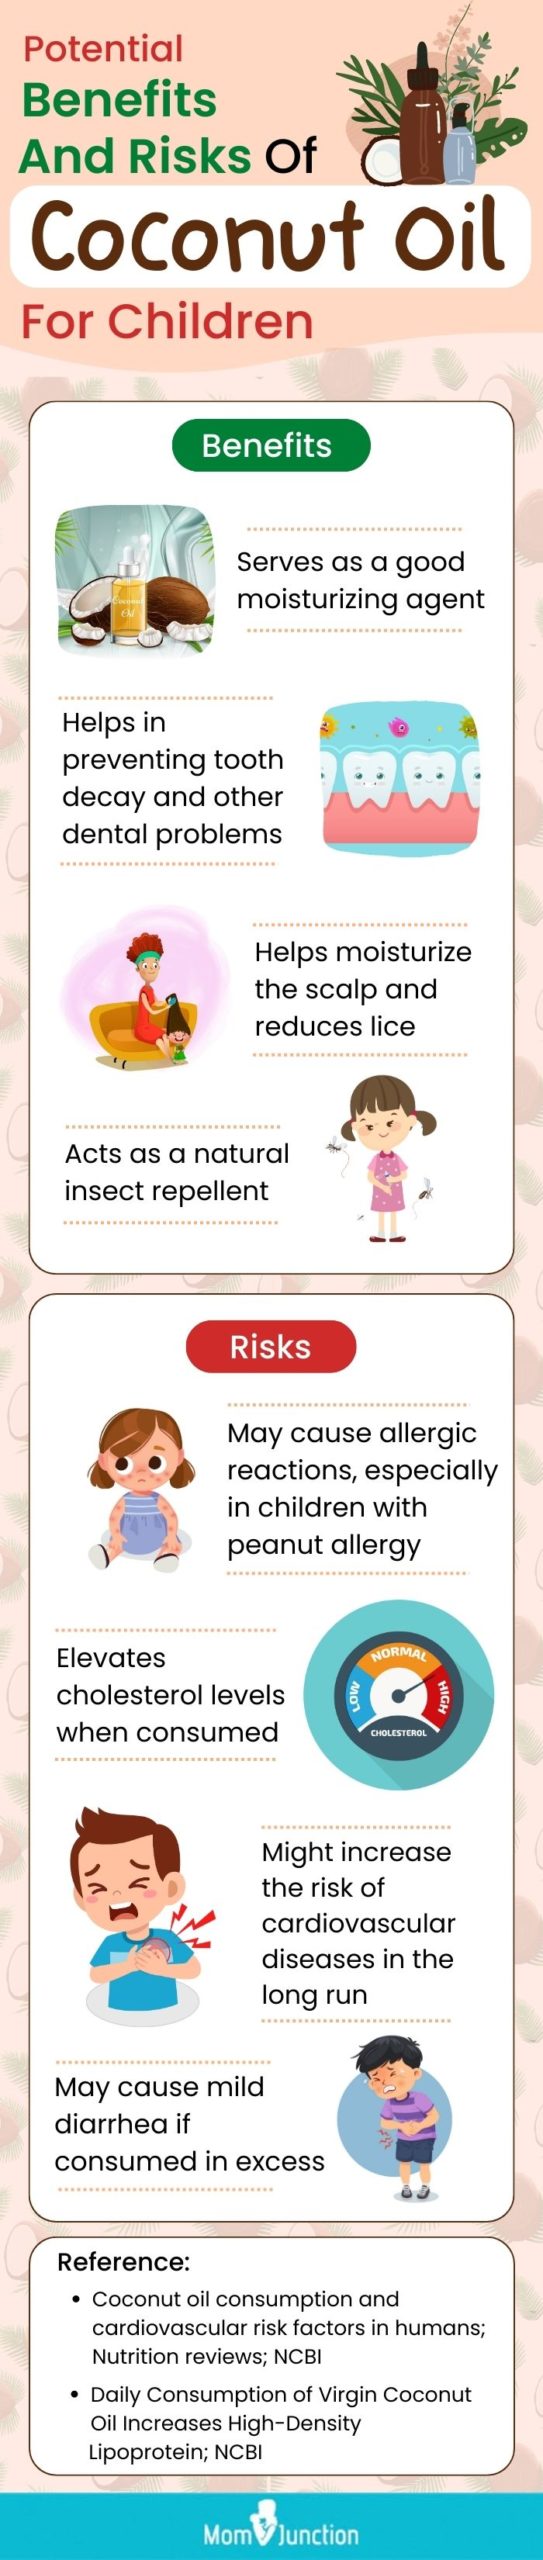 potential benefits and risks of coconut oil for children [infographic]